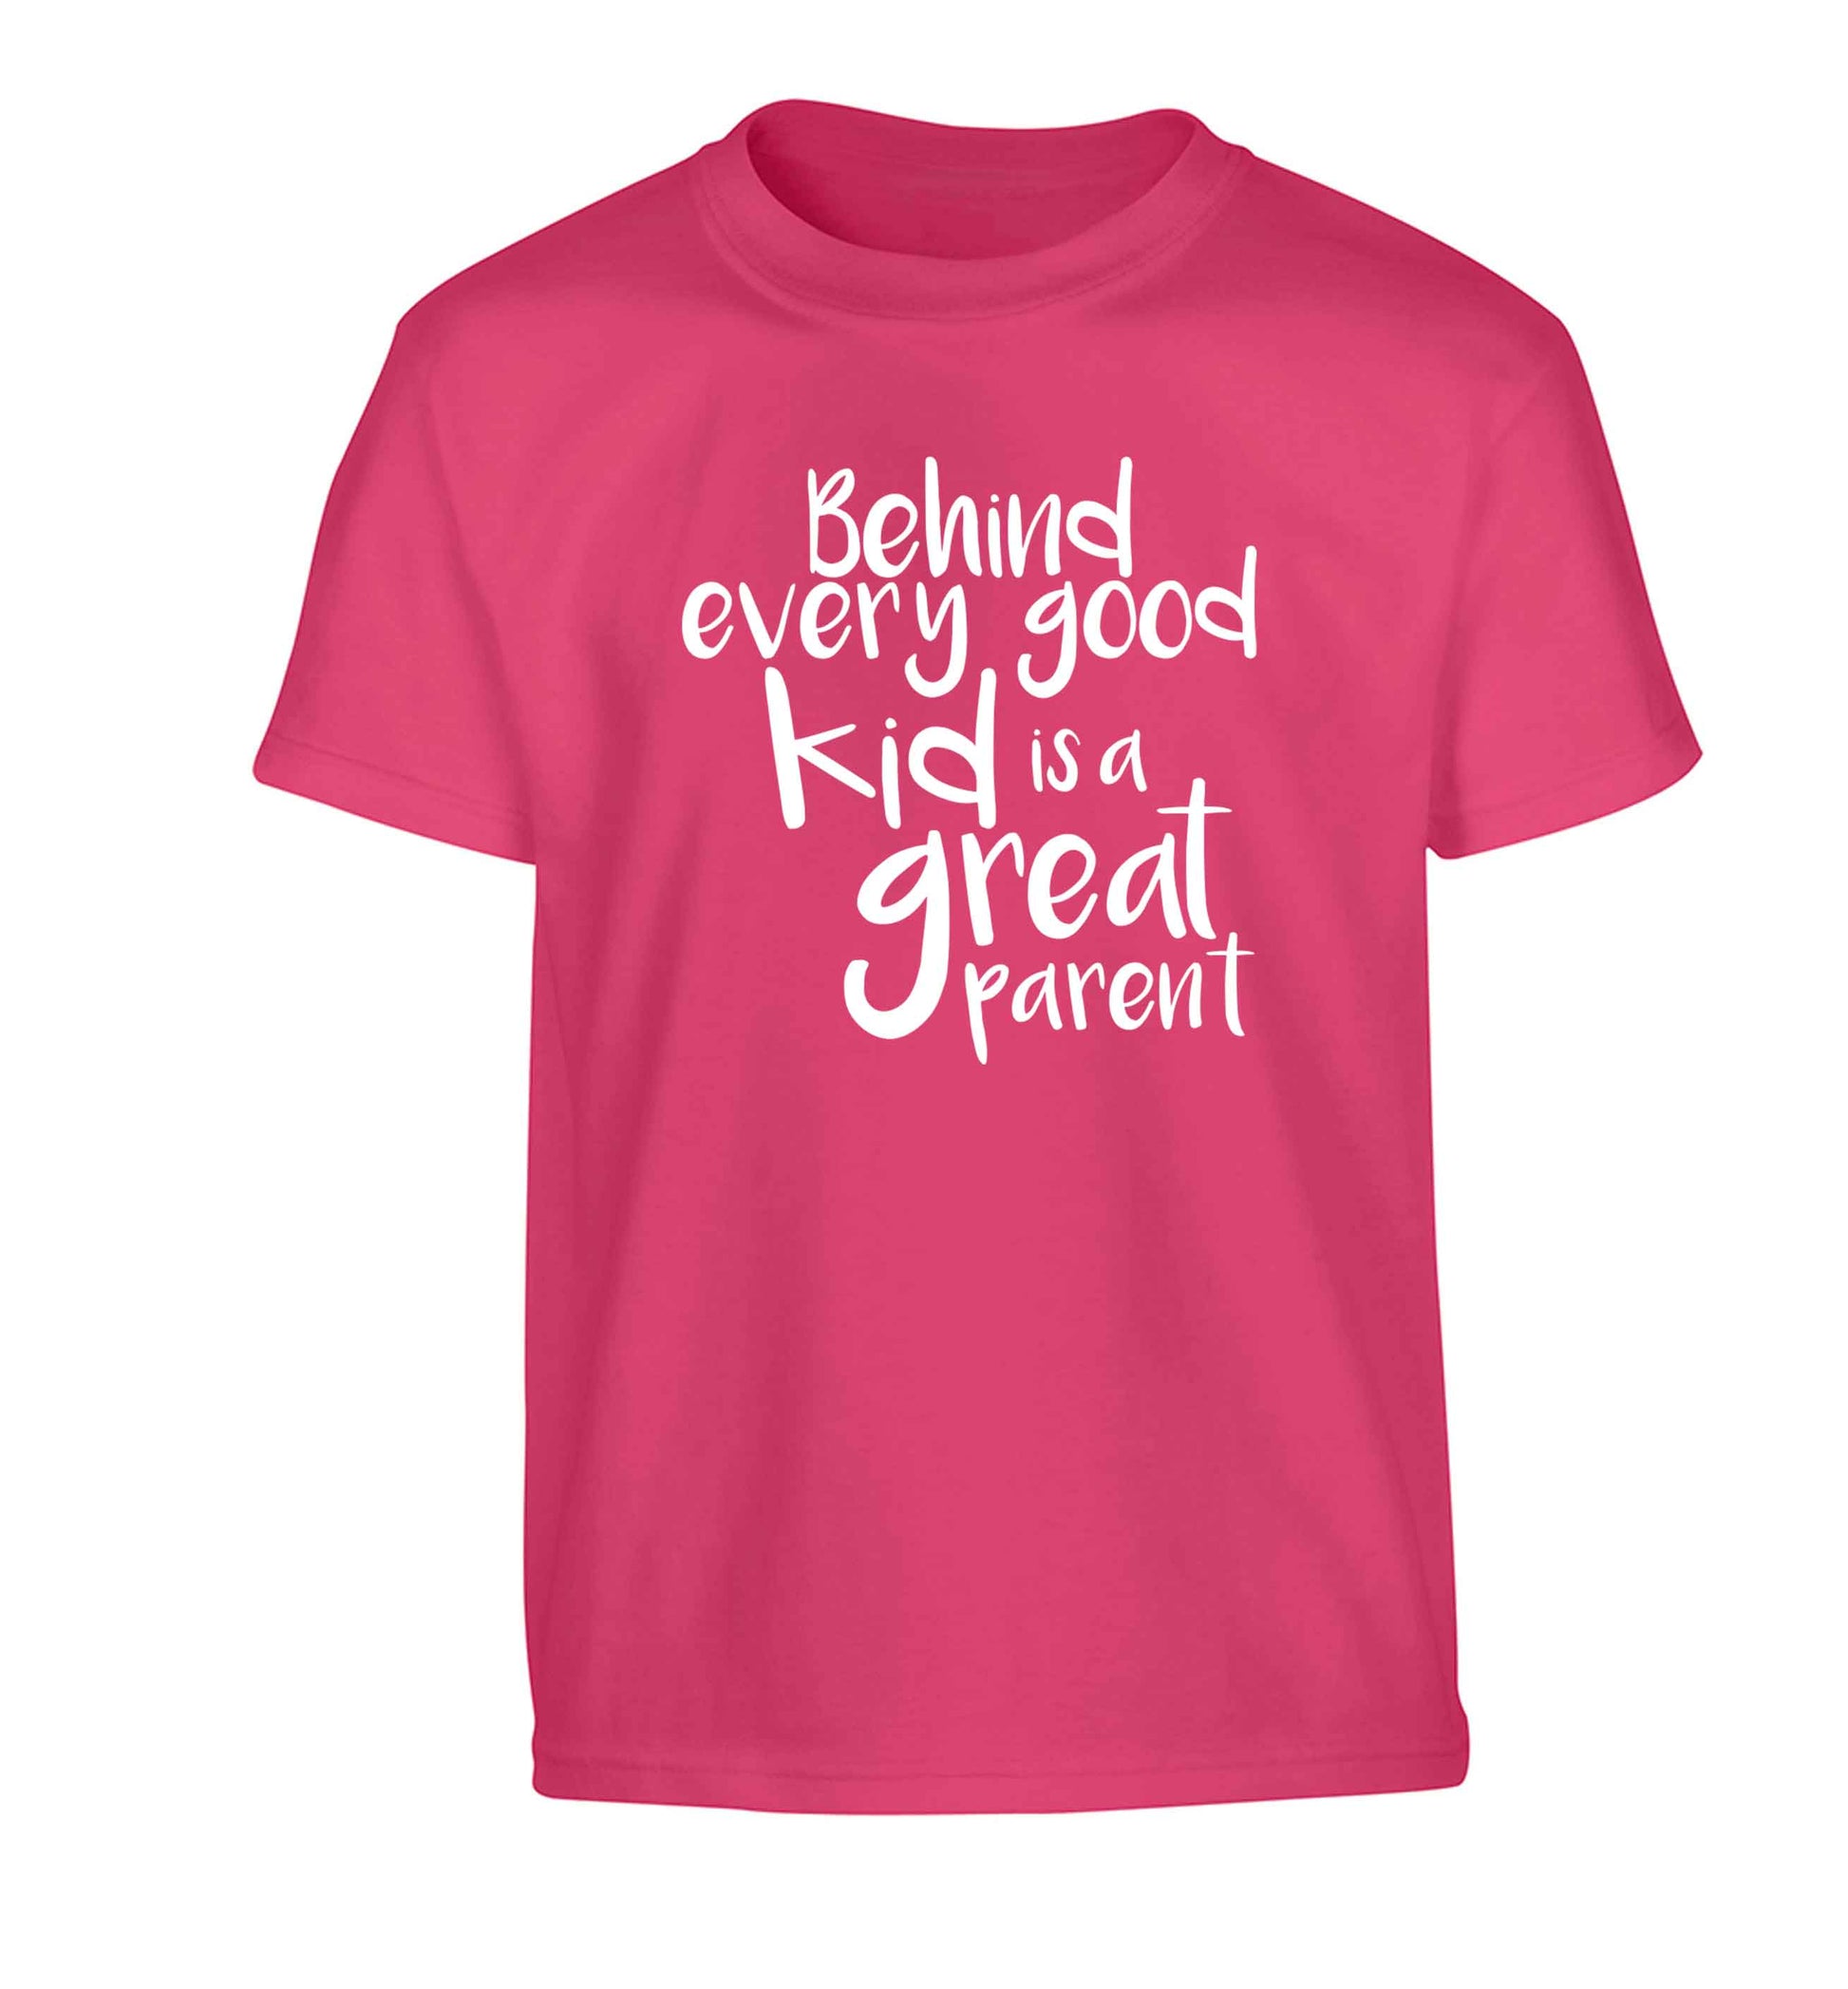 Behind every good kid is a great parent Children's pink Tshirt 12-13 Years